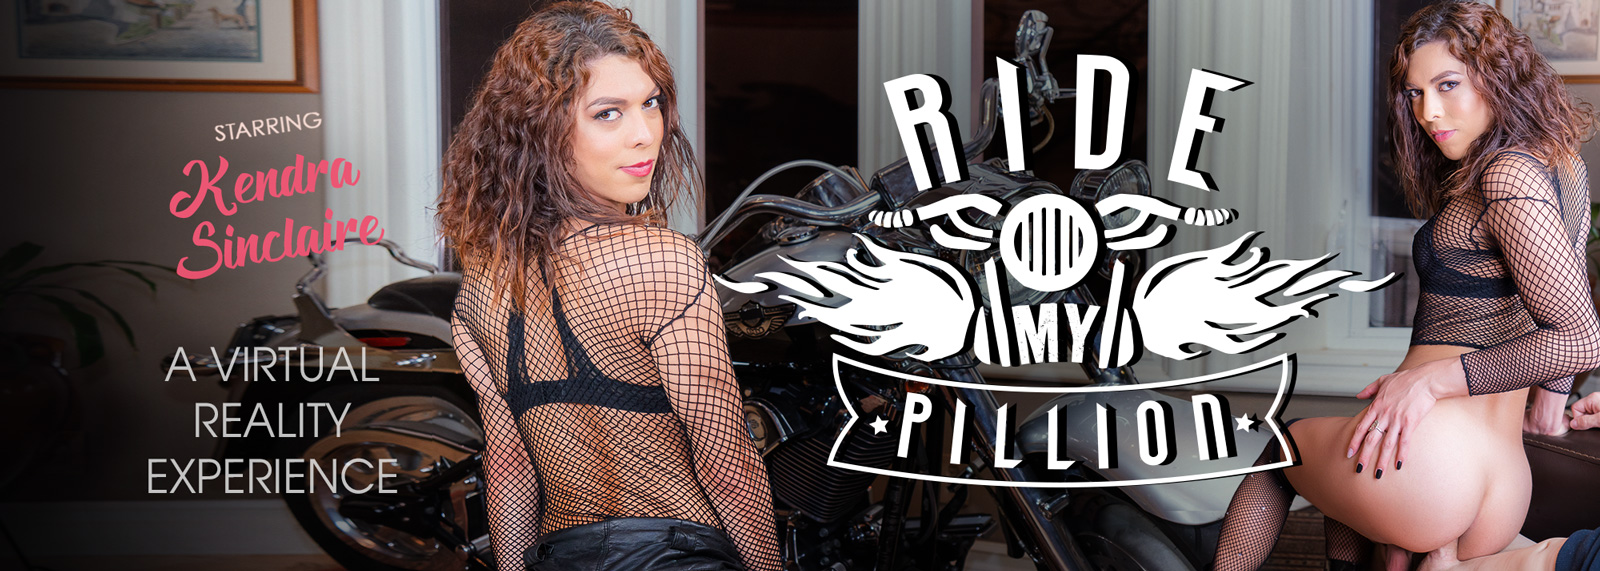 Ride My Pillion - VR Porn Video, Starring: Kendra Sinclaire VR